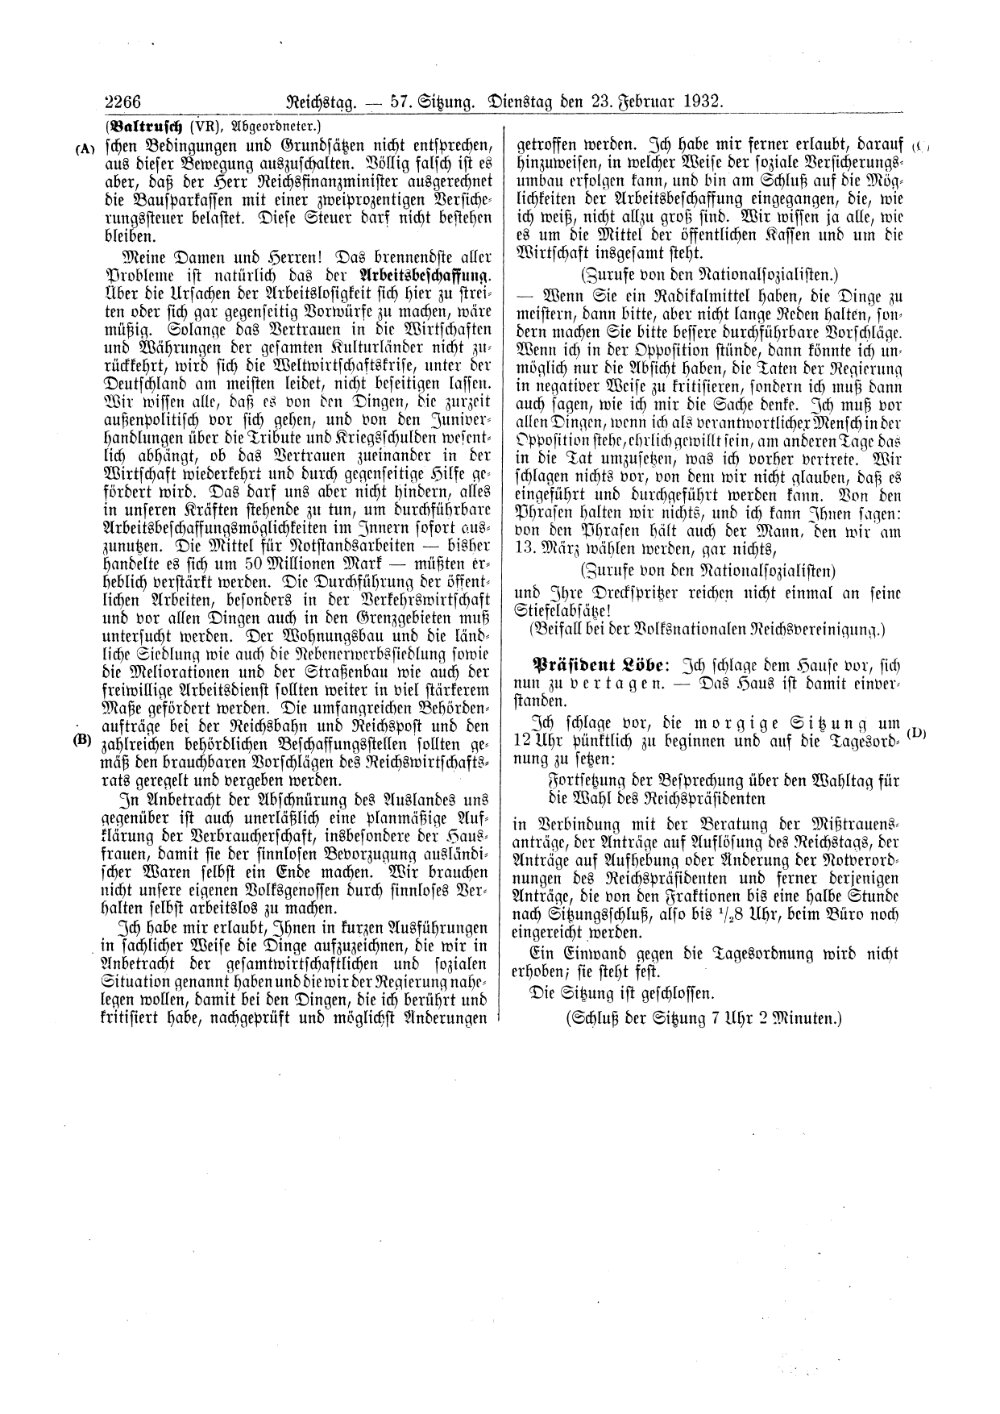 Scan of page 2266